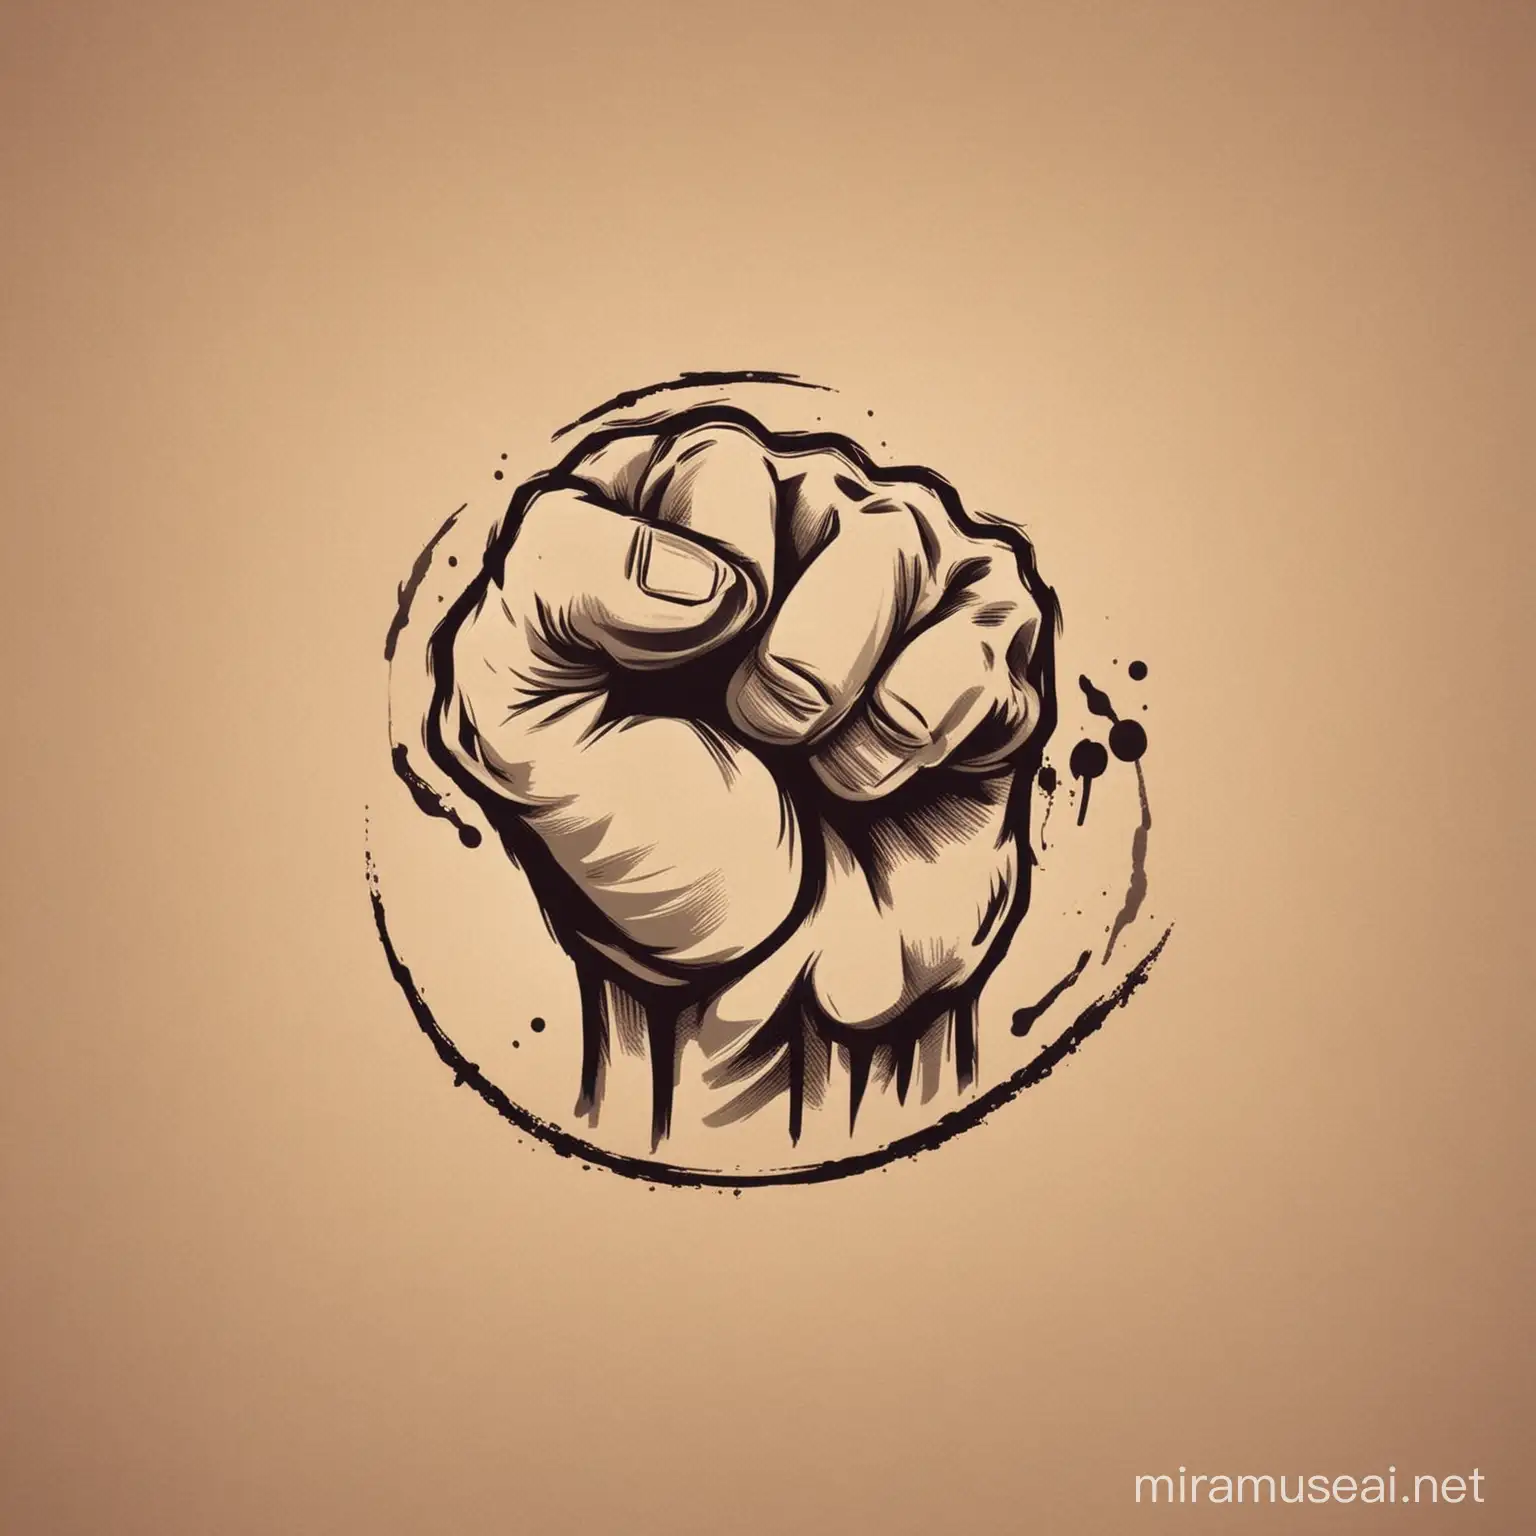 Create a logo with a fist that opens 